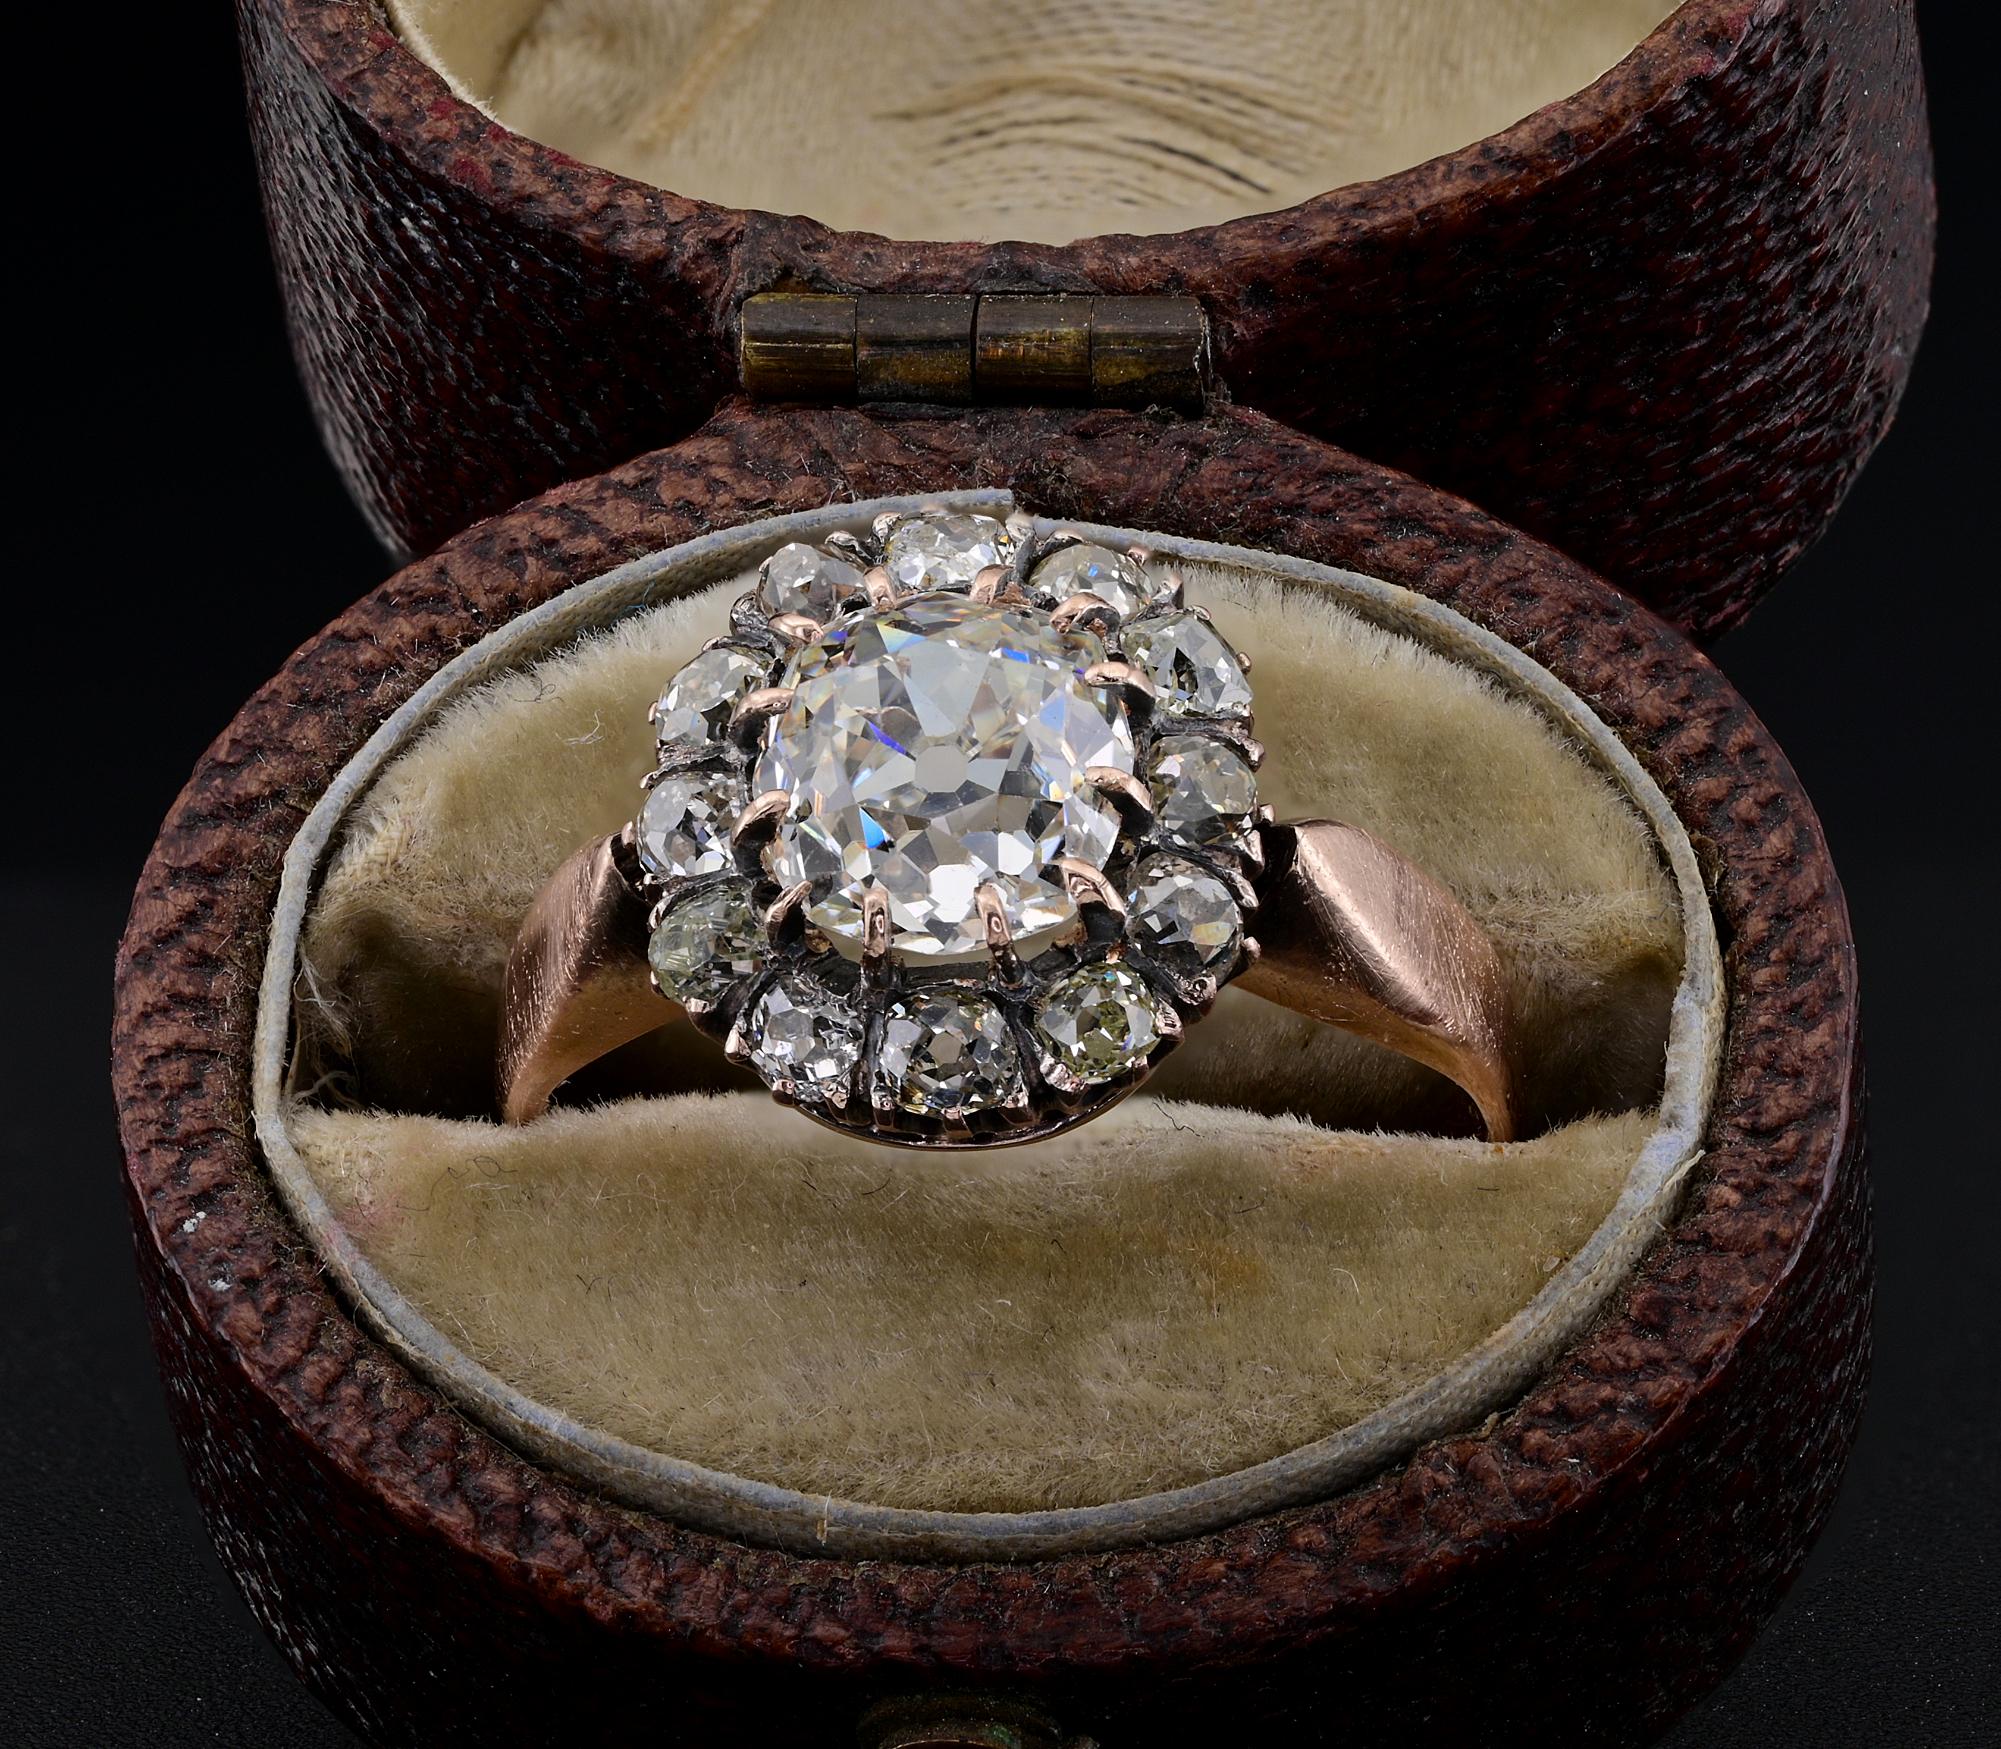 This marvelous antique Diamond ring is Victorian period 1890 ca
Skillfully hand crafted of solid 18 KT gold in traditional cluster design with the main stone set in the middle and a halo of Diamonds in surround
Centrally set with a bright white old